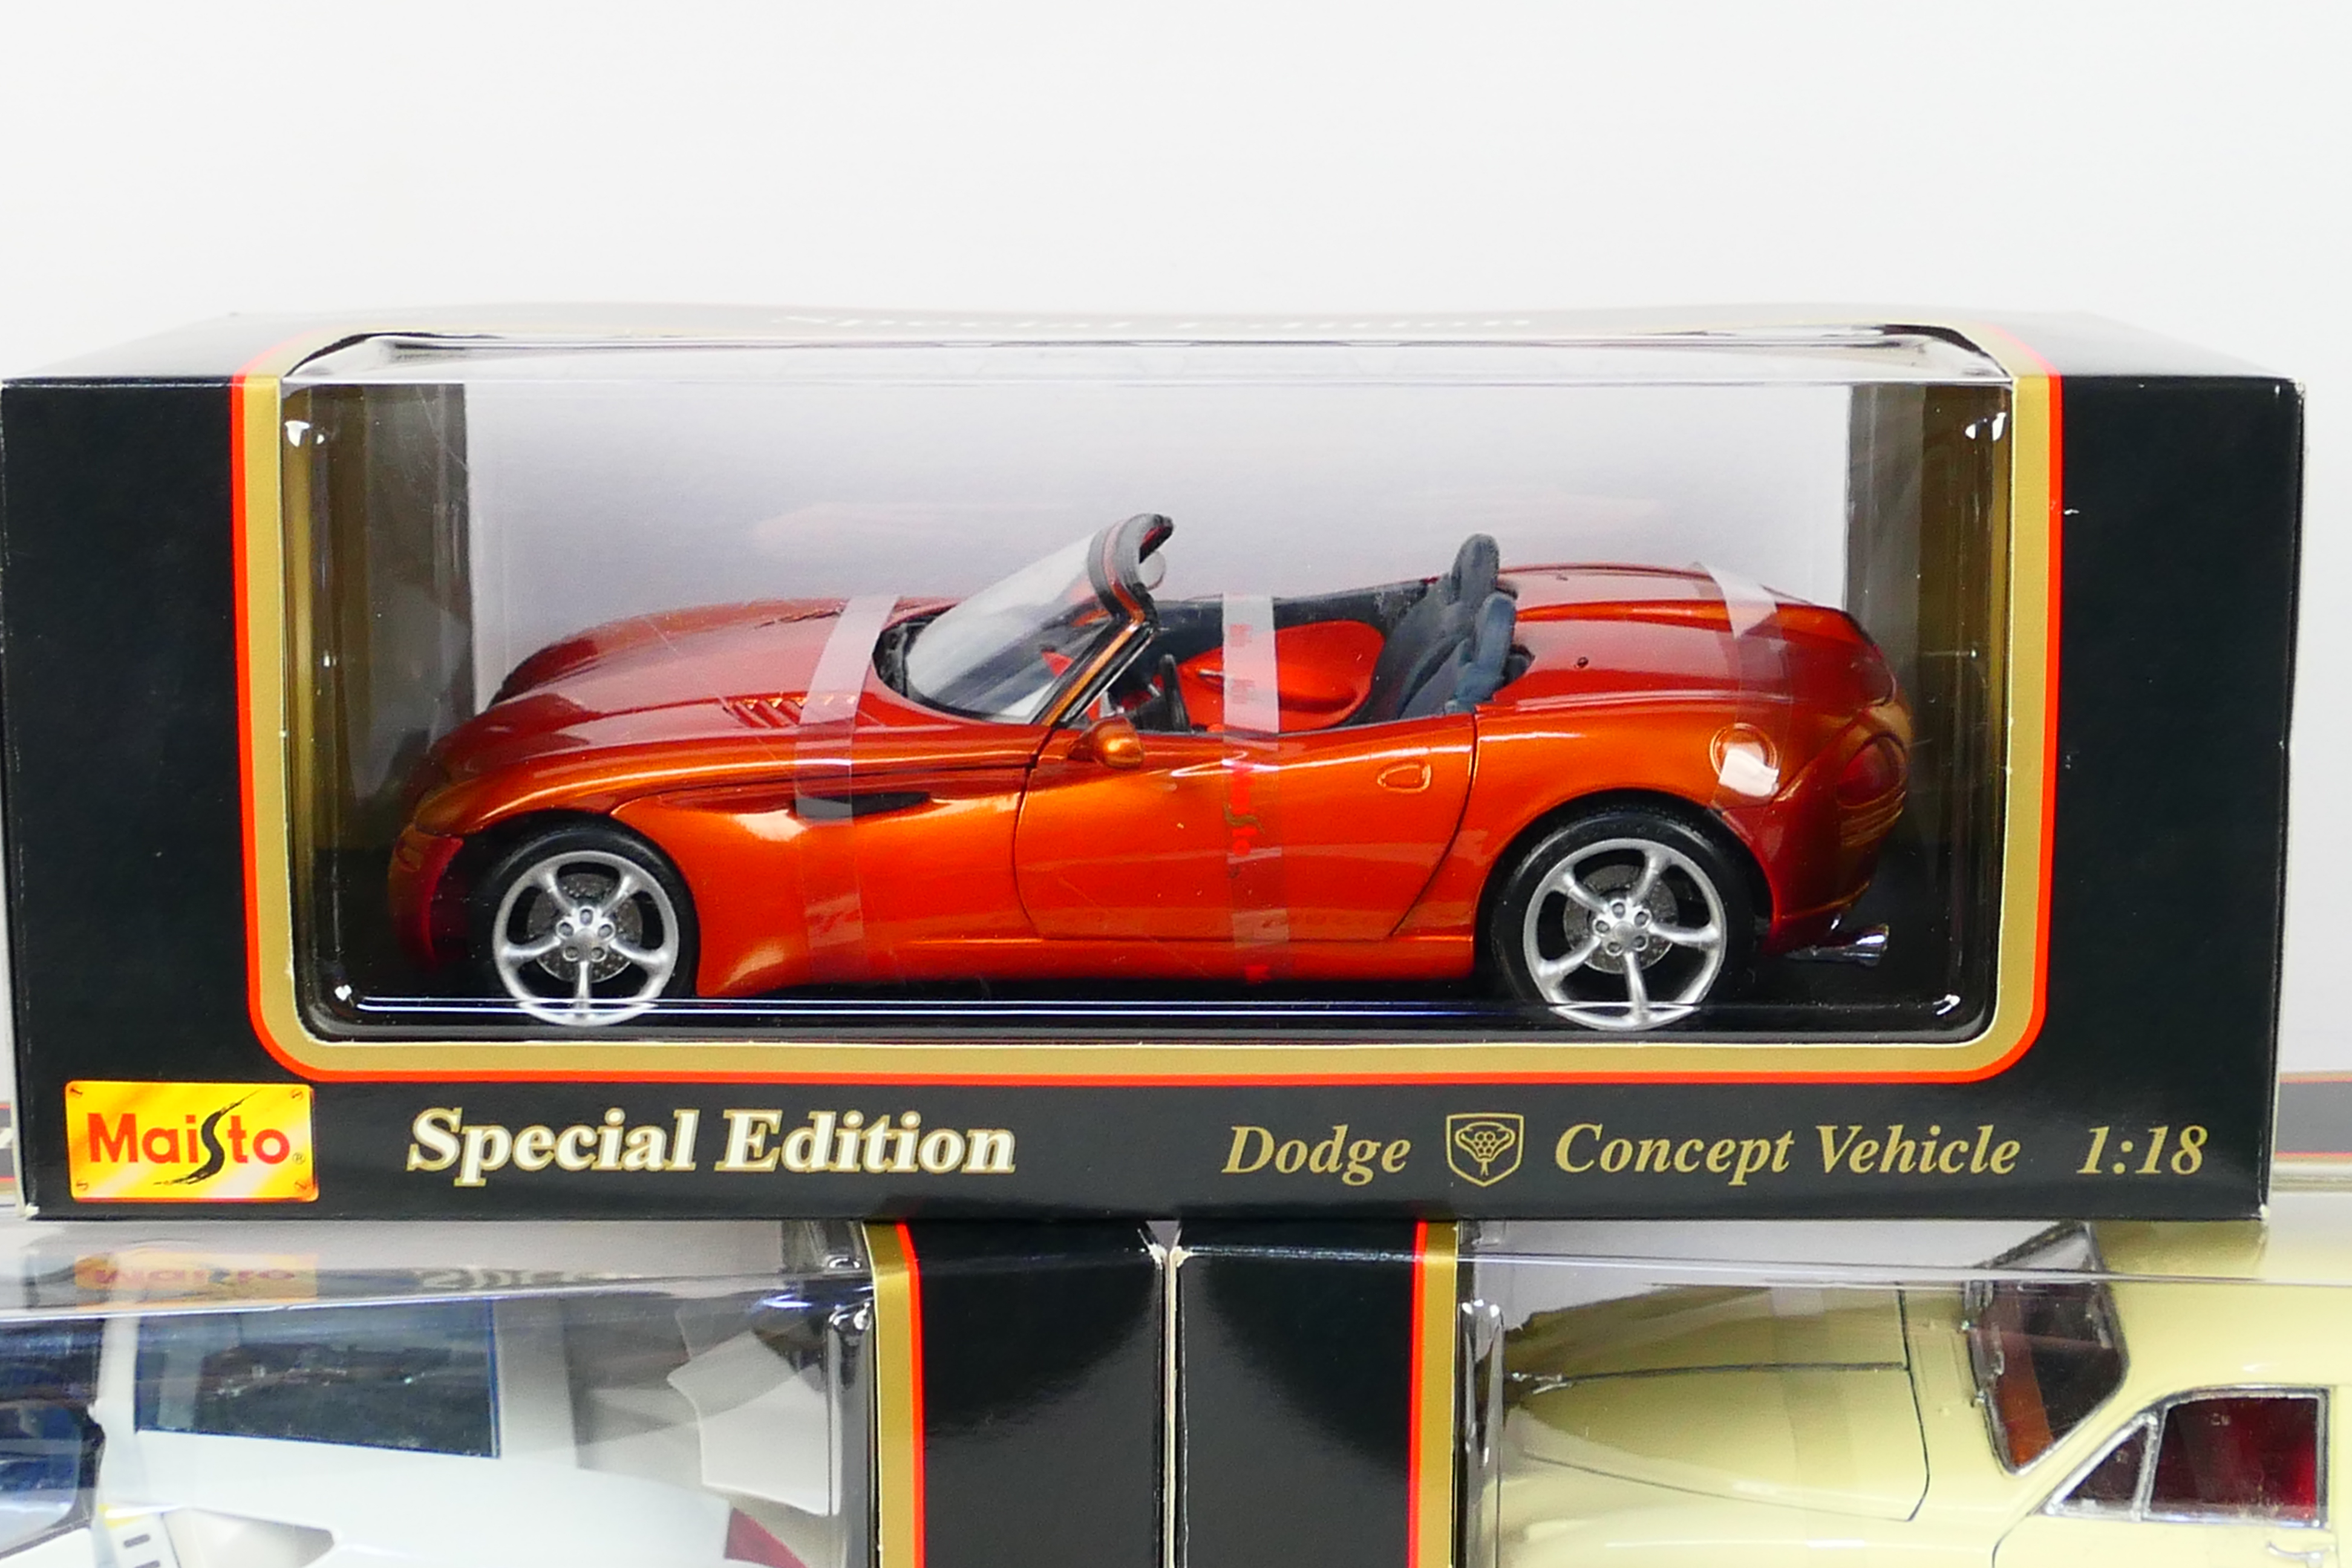 Maisto - Three boxed diecast 1:18 scale model cars from Maisto. - Image 2 of 4